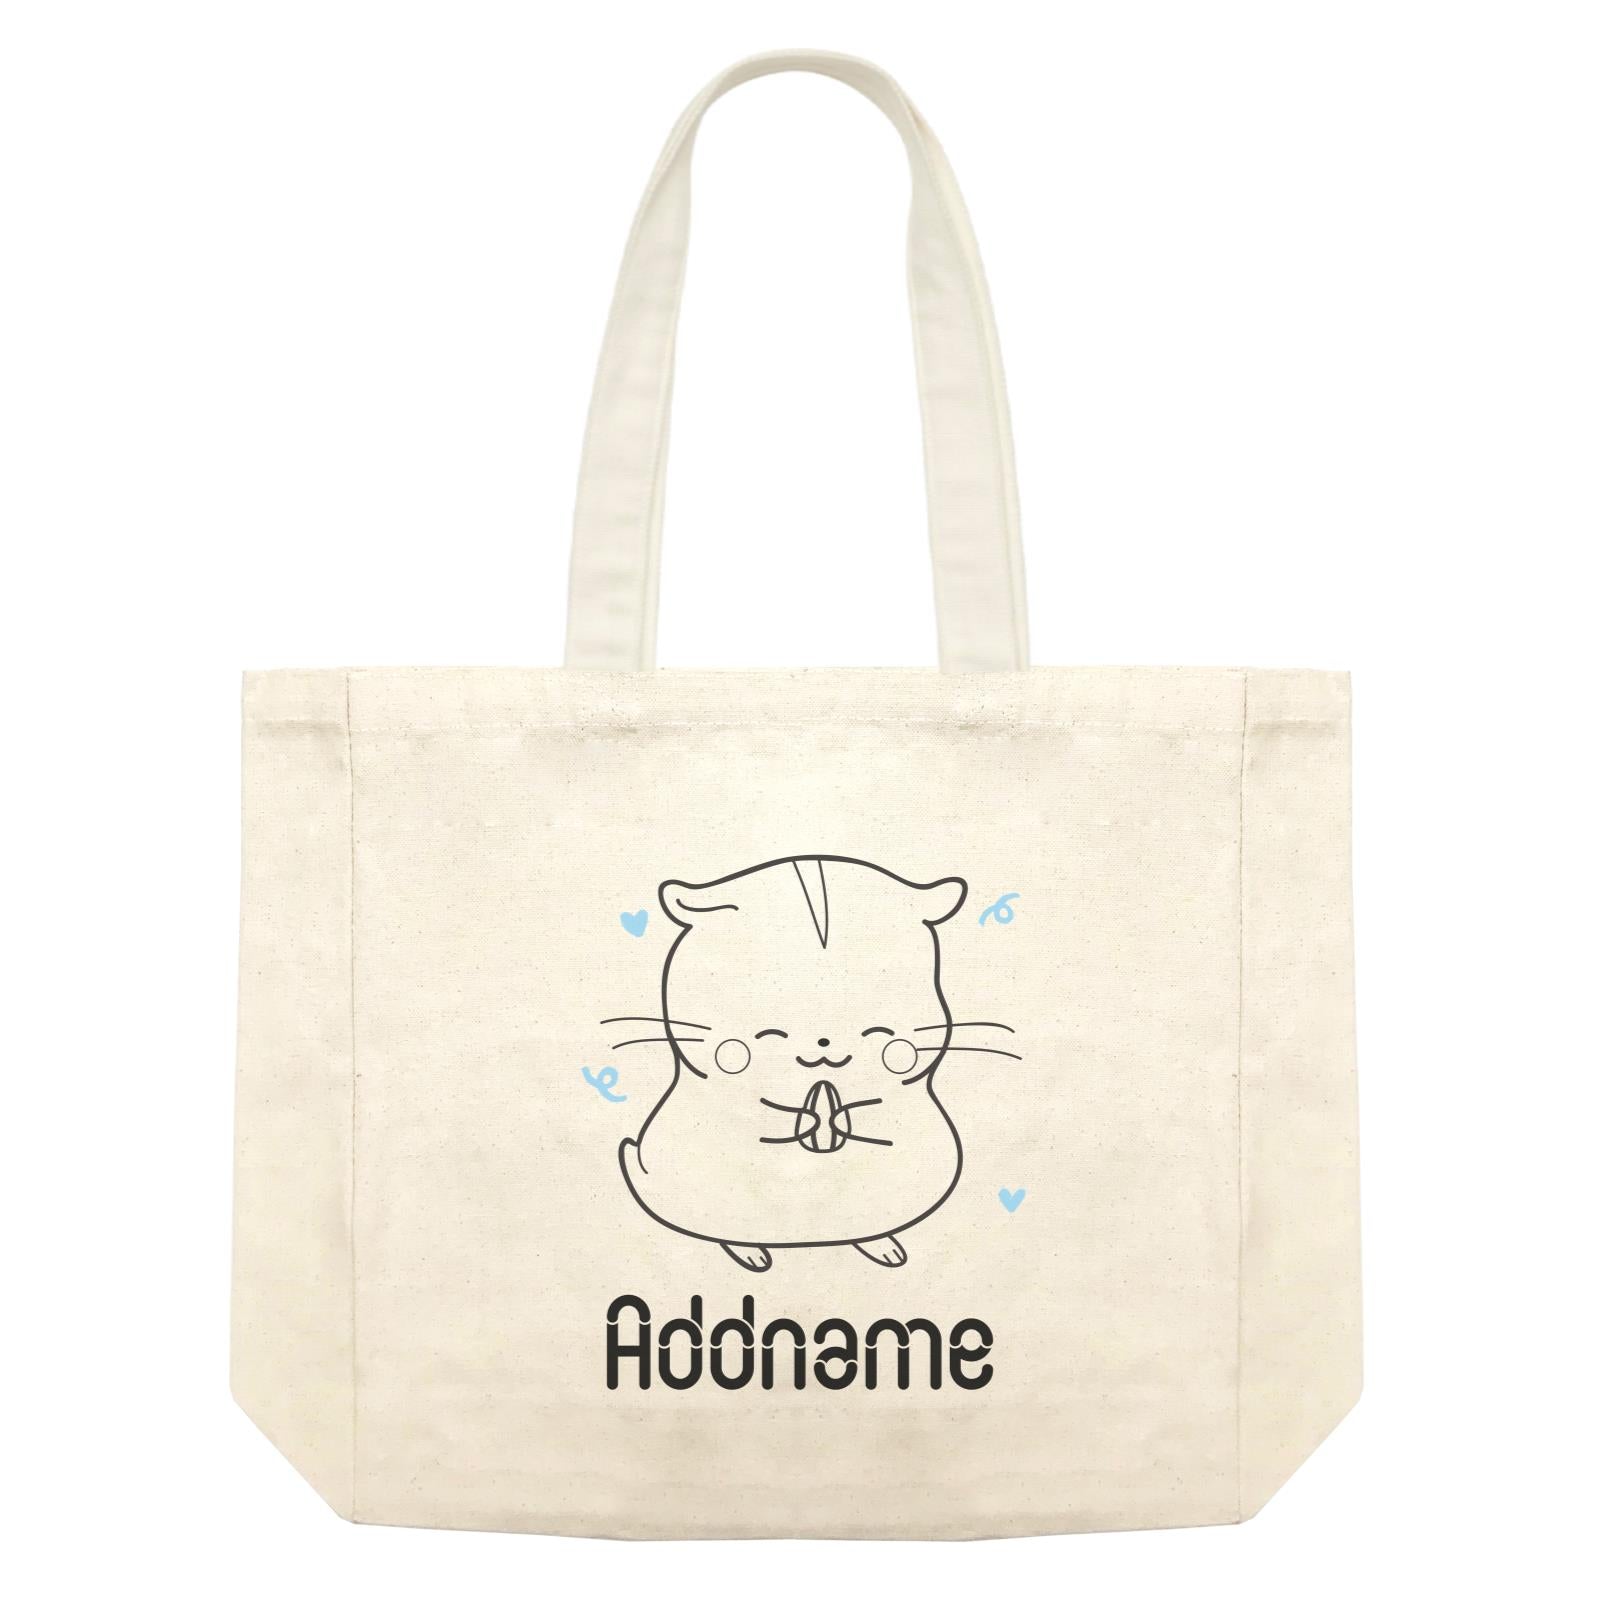 Coloring Outline Cute Hand Drawn Animals Farm Hamster Addname Shopping Bag